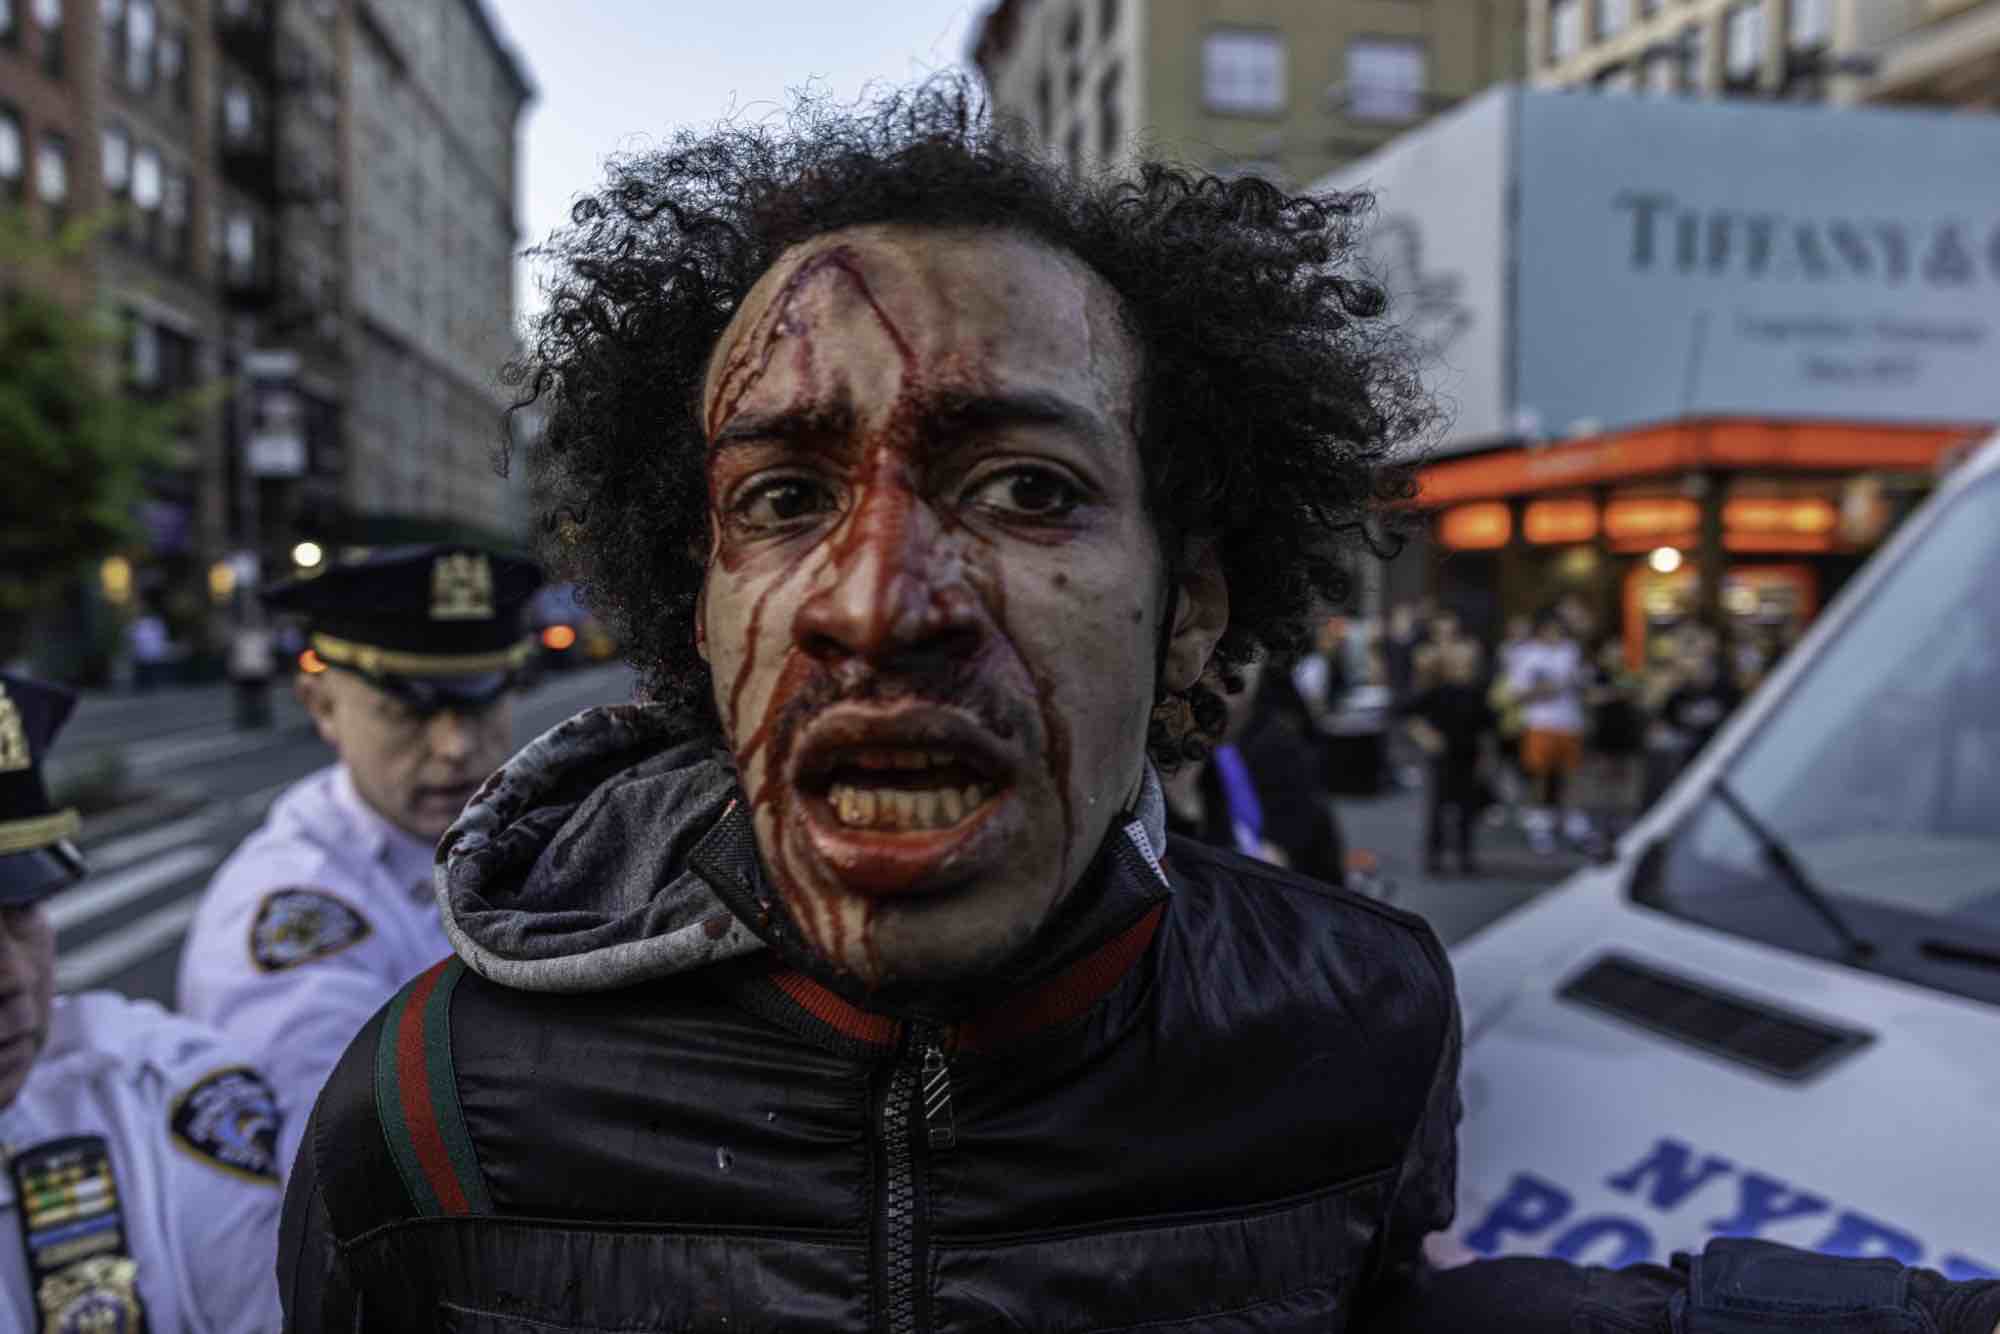 The bloody face of someone arrested at a vigil for Jordan Neely on May 8, 2023.